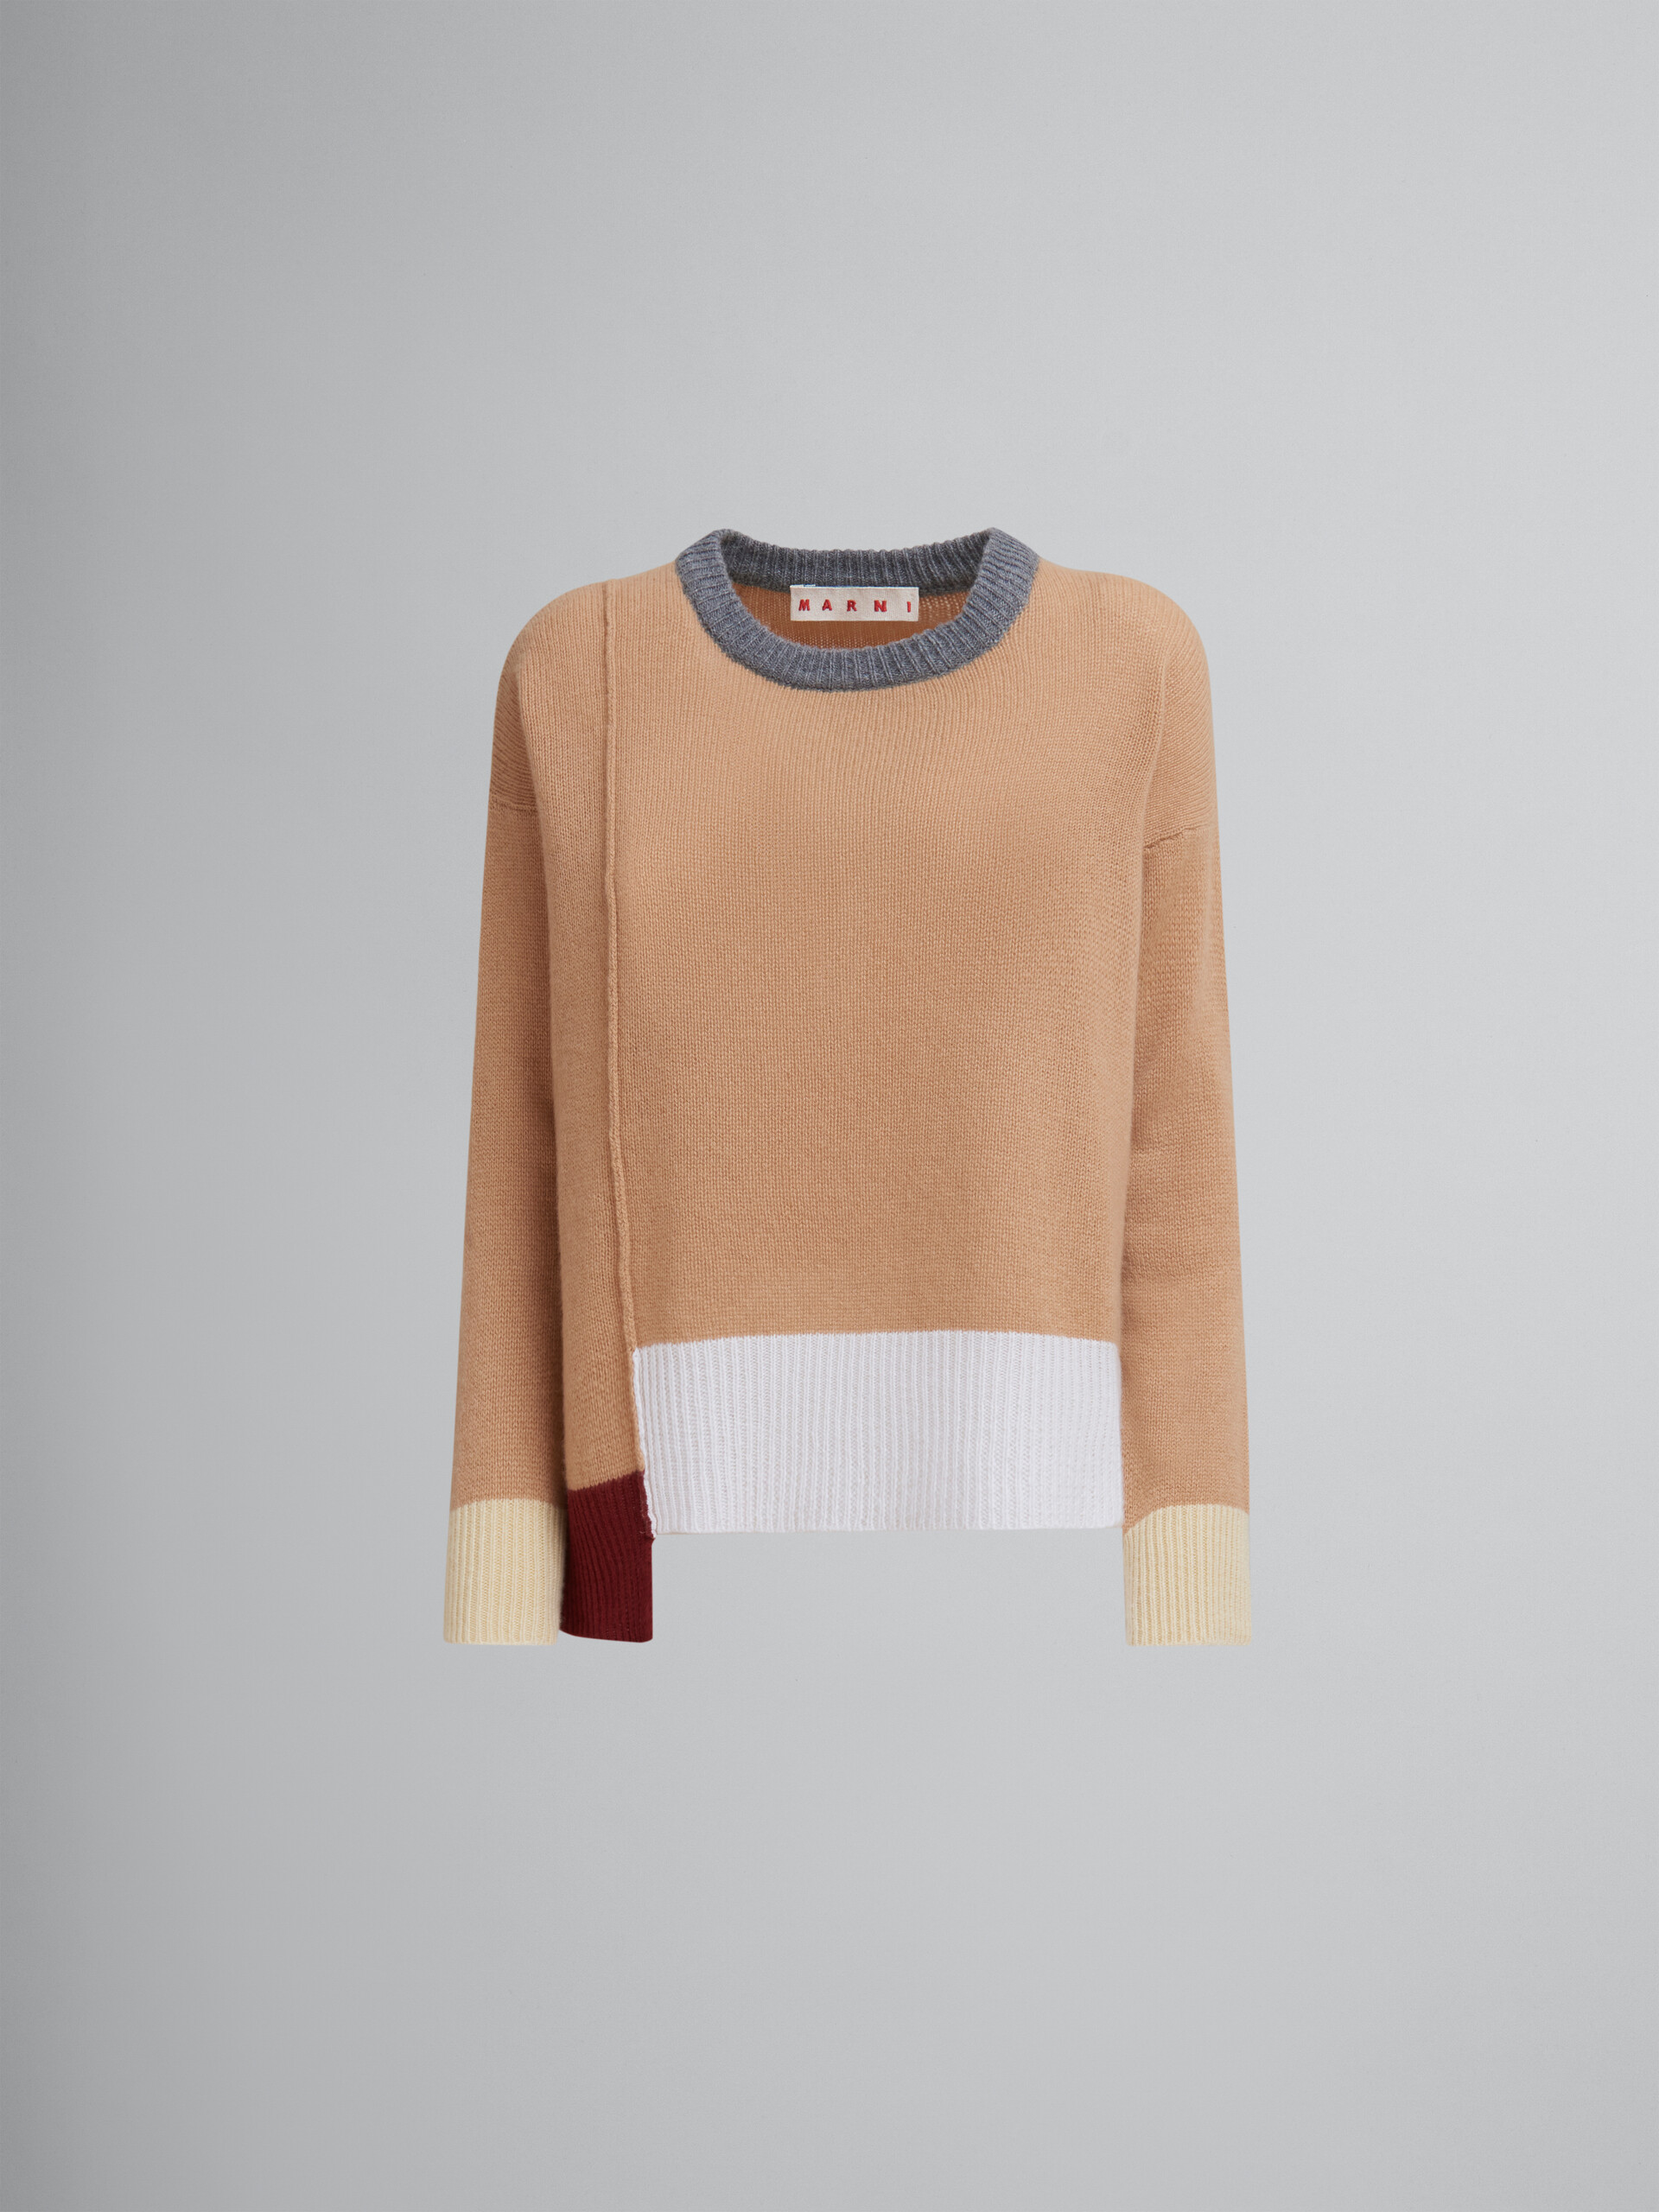  - Pullover - Image 1